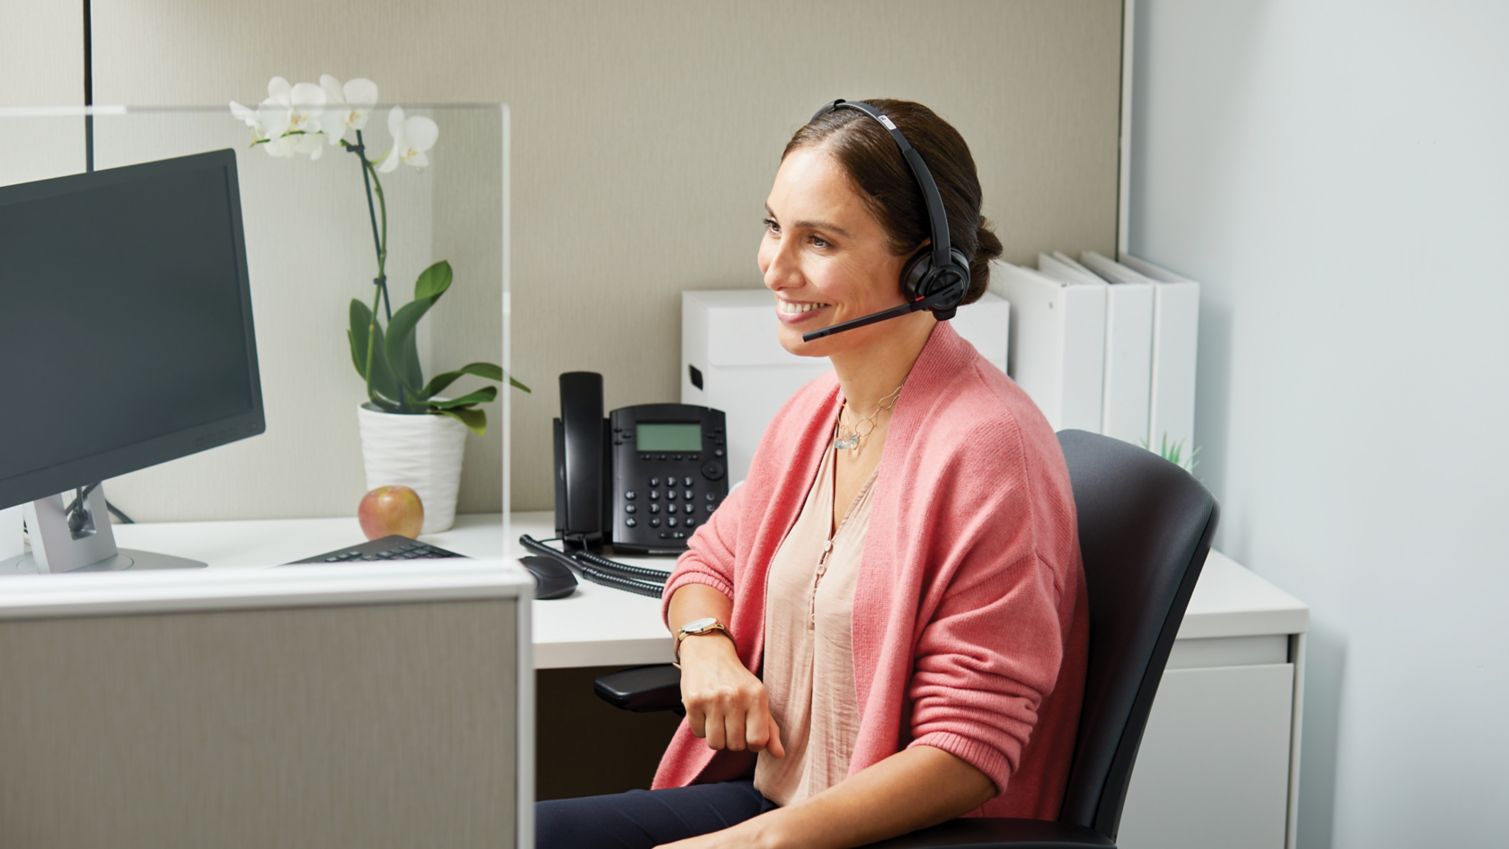 A customer care representative makes a call from her office using a headset.